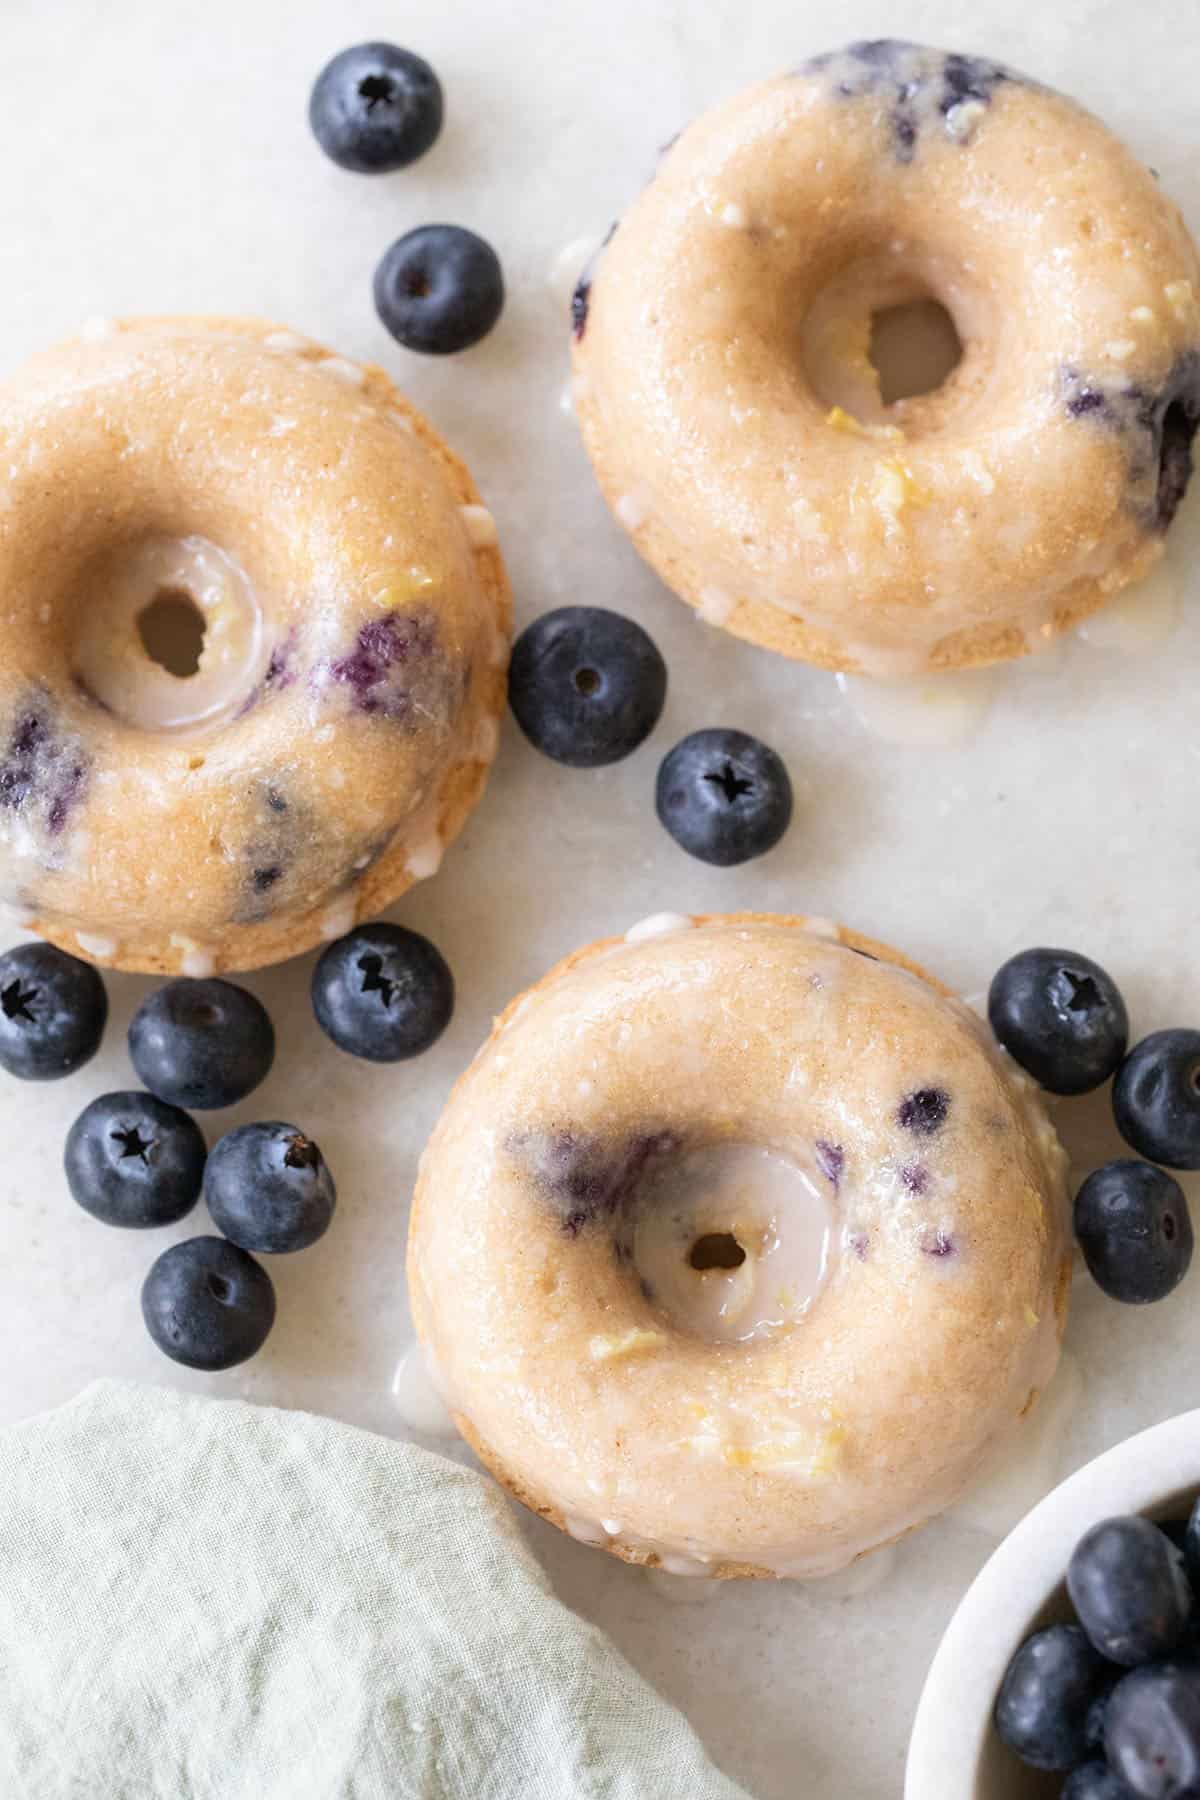 Baked blueberry donuts with glaze.